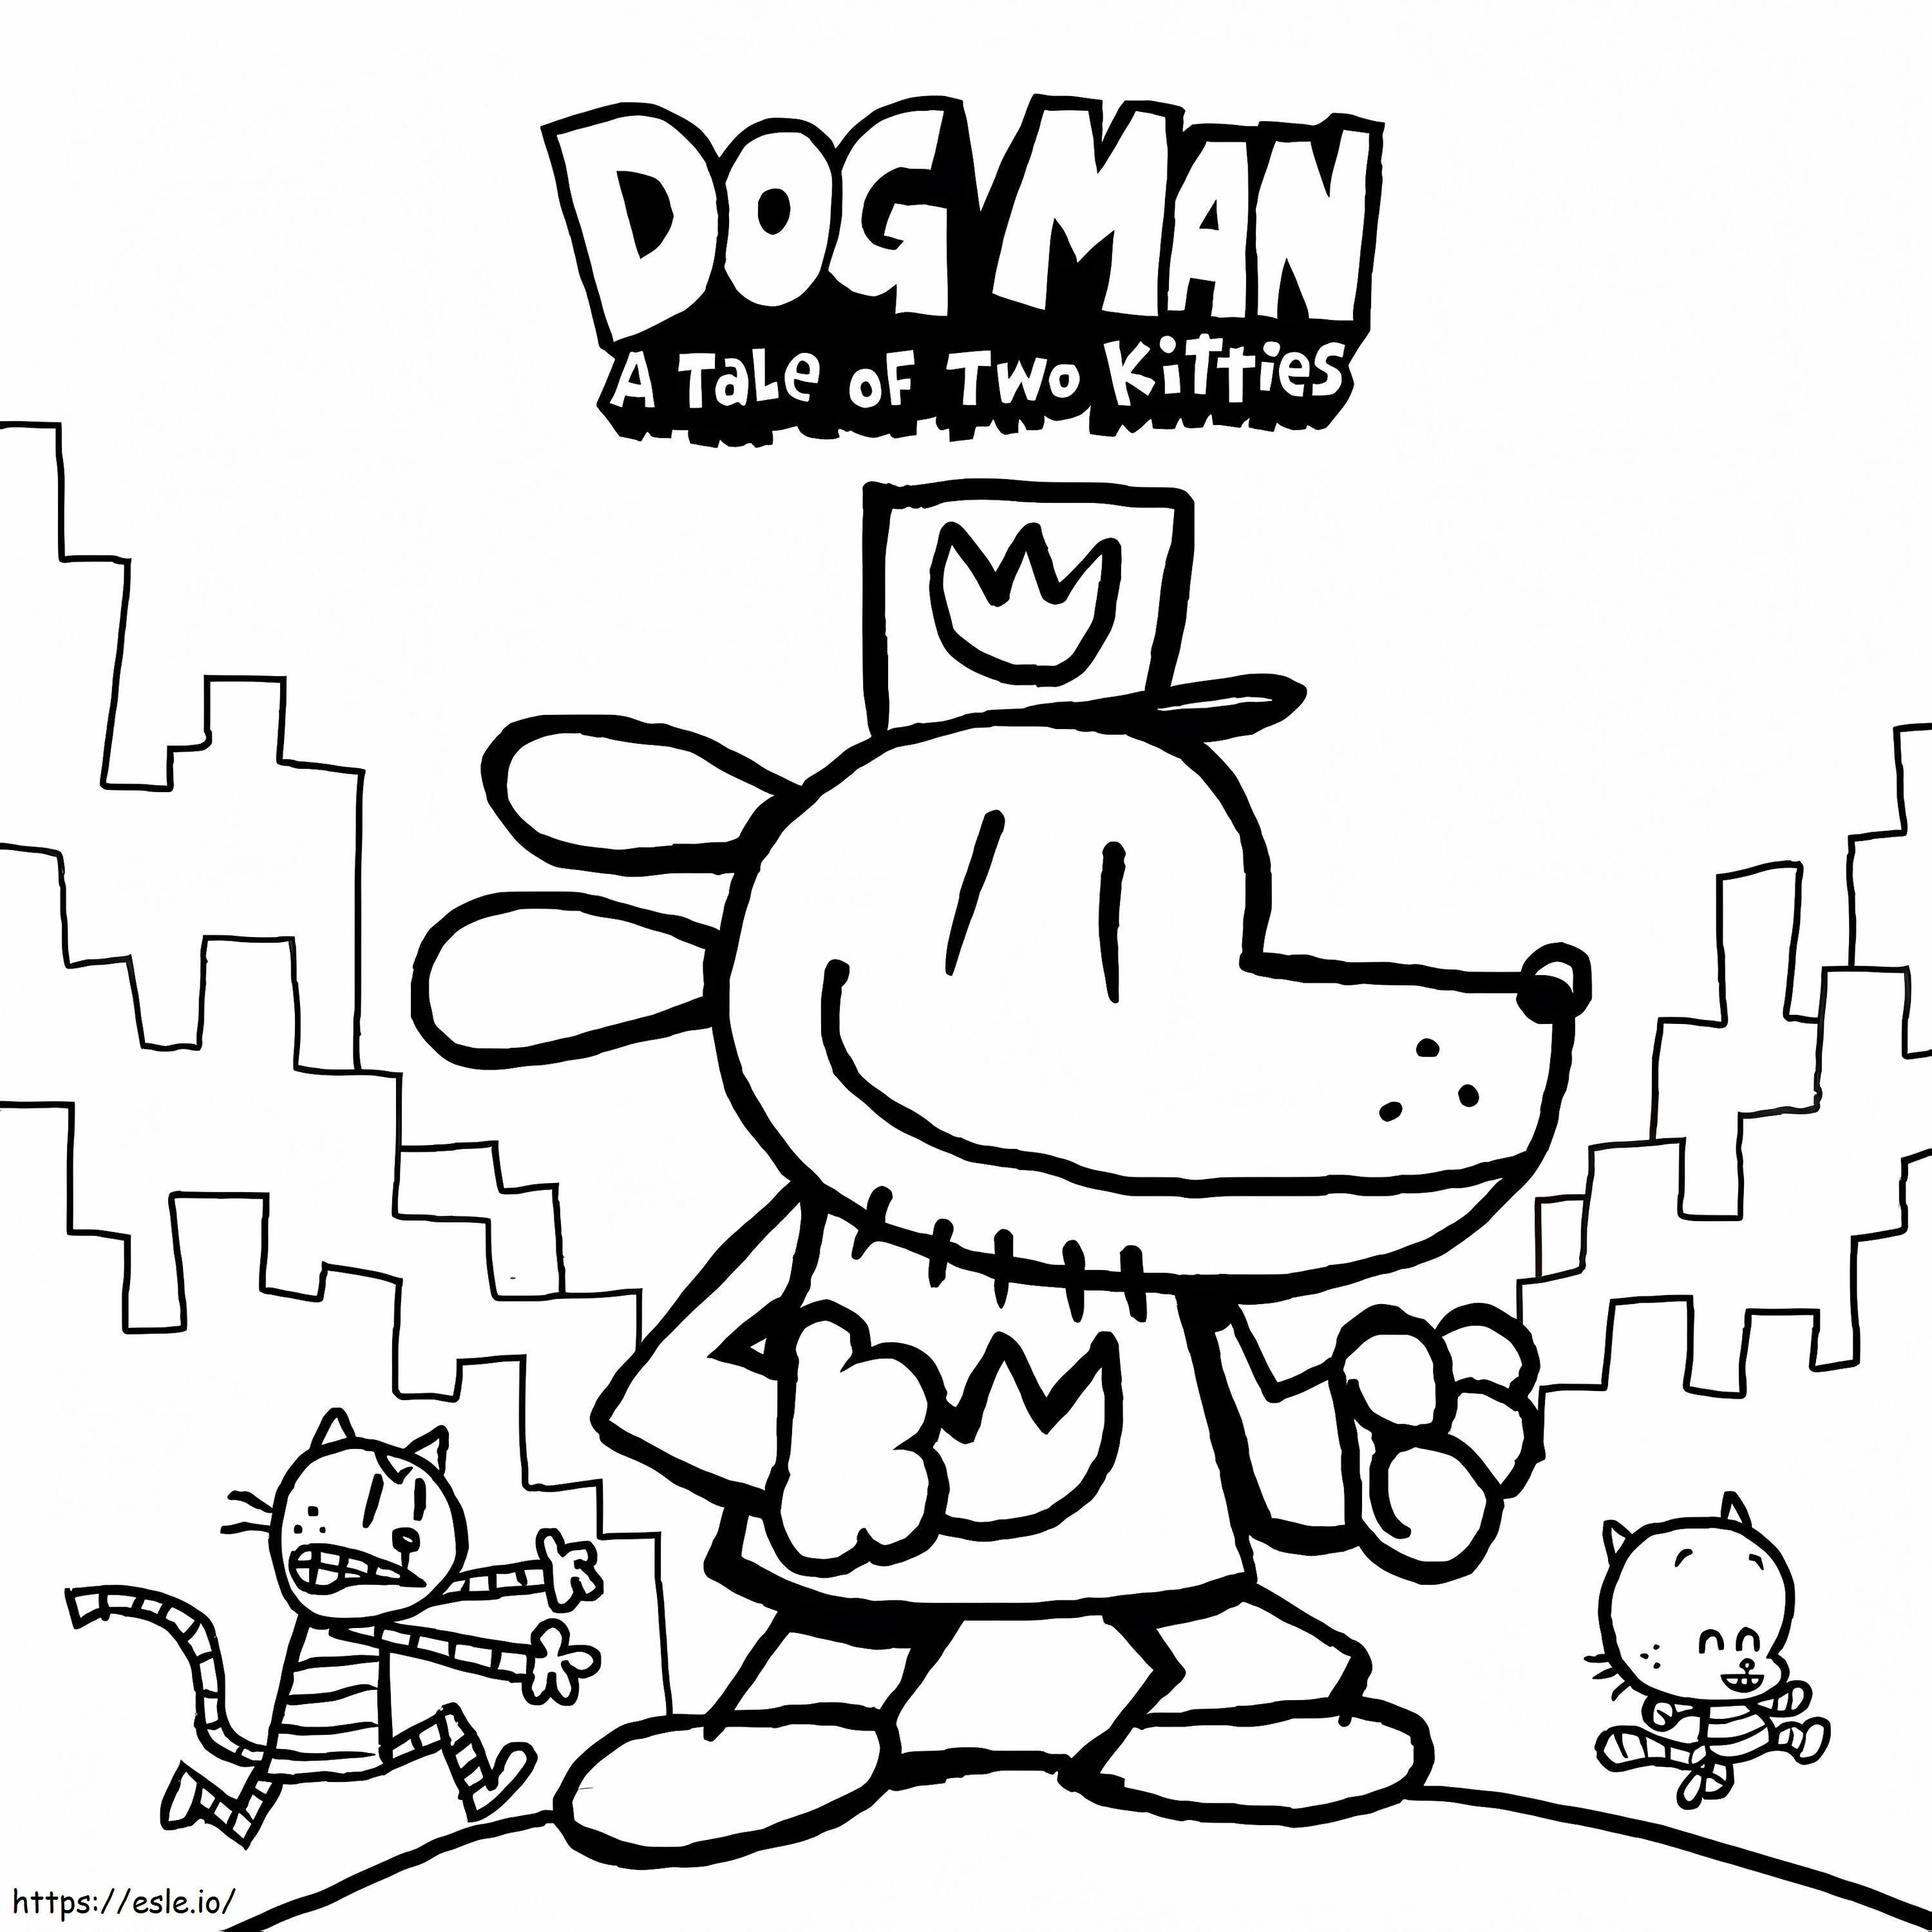 AAwesome Dog Man coloring page